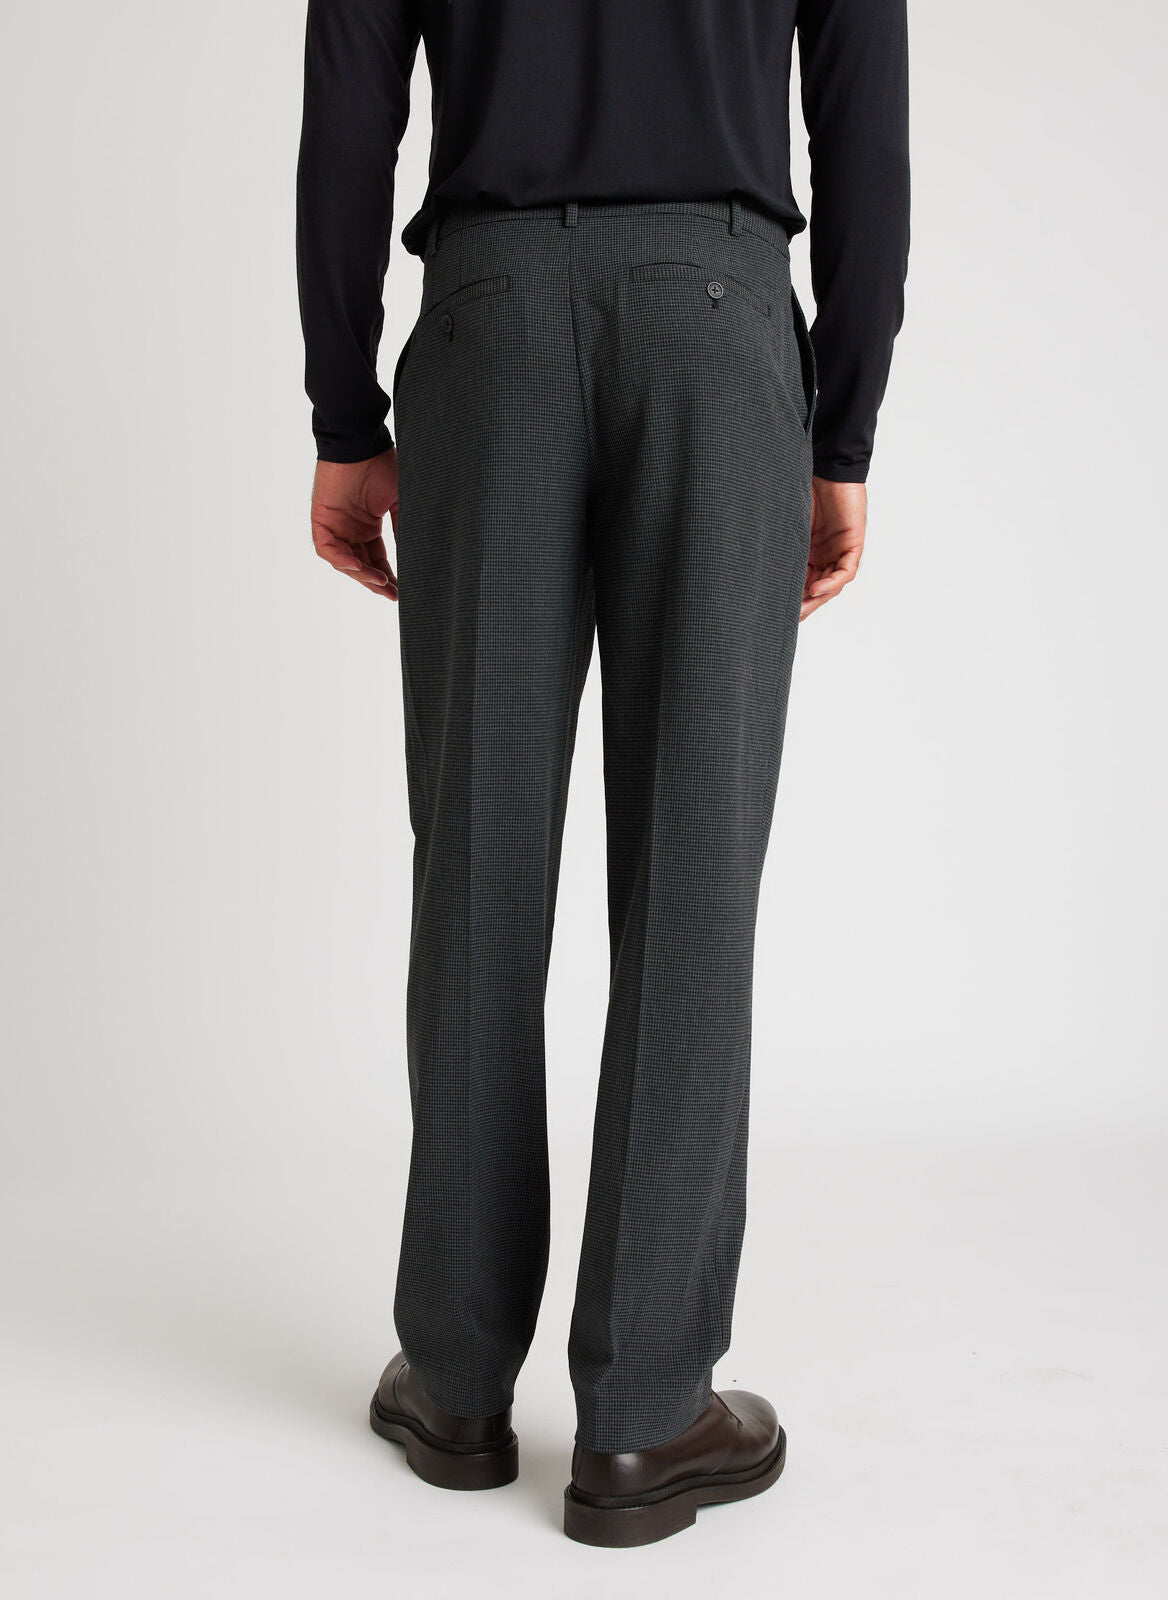 Kit and Ace — Stellar Recycled Suiting Trousers Standard Fit